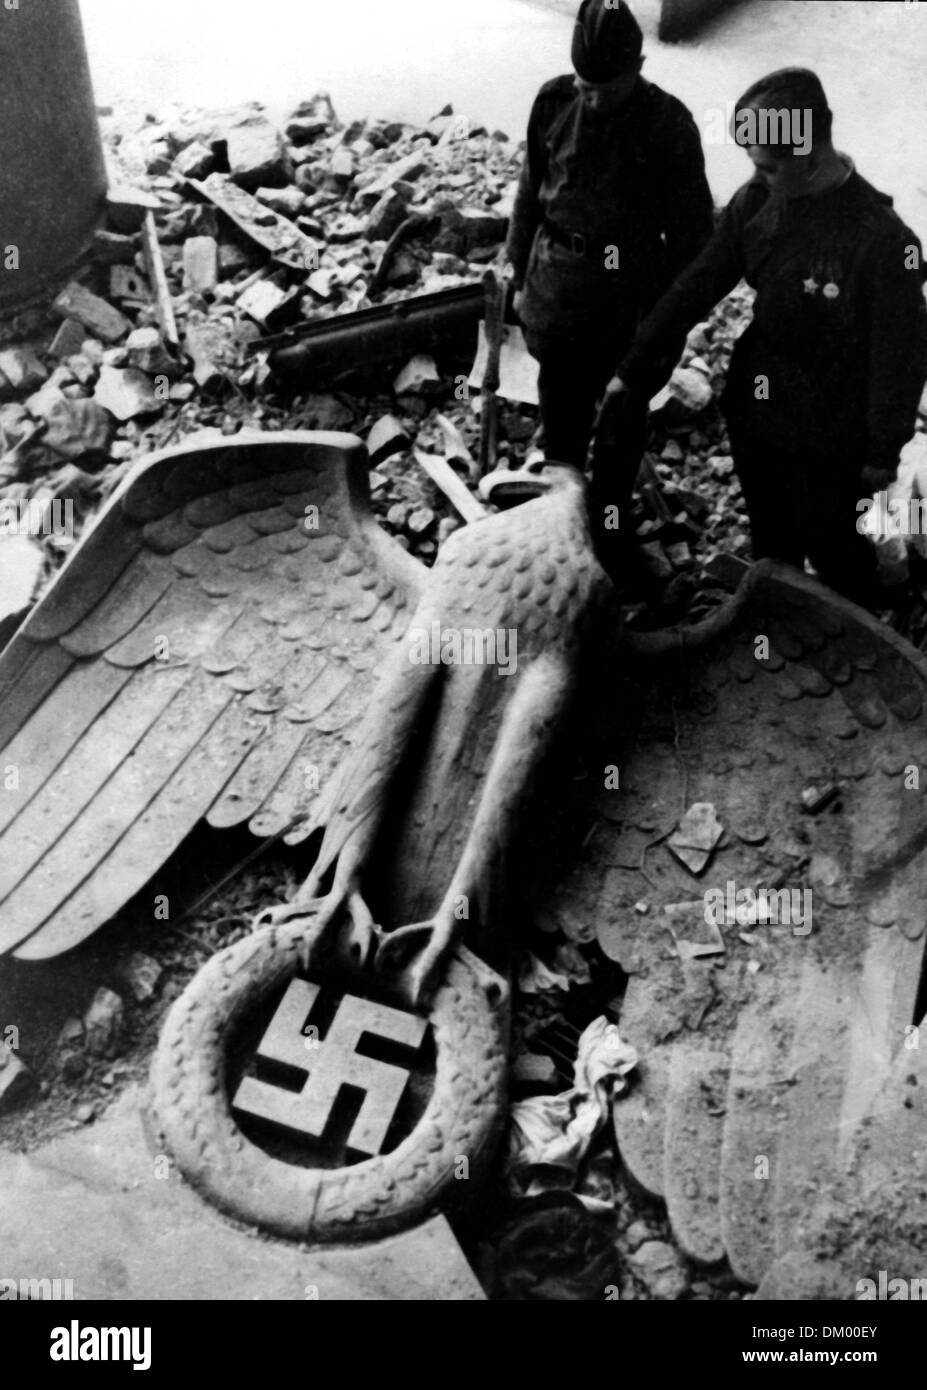 The end of the war in Berlin in 1945 - Soviet soldiers are pictured with a toppled Reichsadler (Imperial Eagle) with swastika. Fotoarchiv für Zeitgeschichte Stock Photo